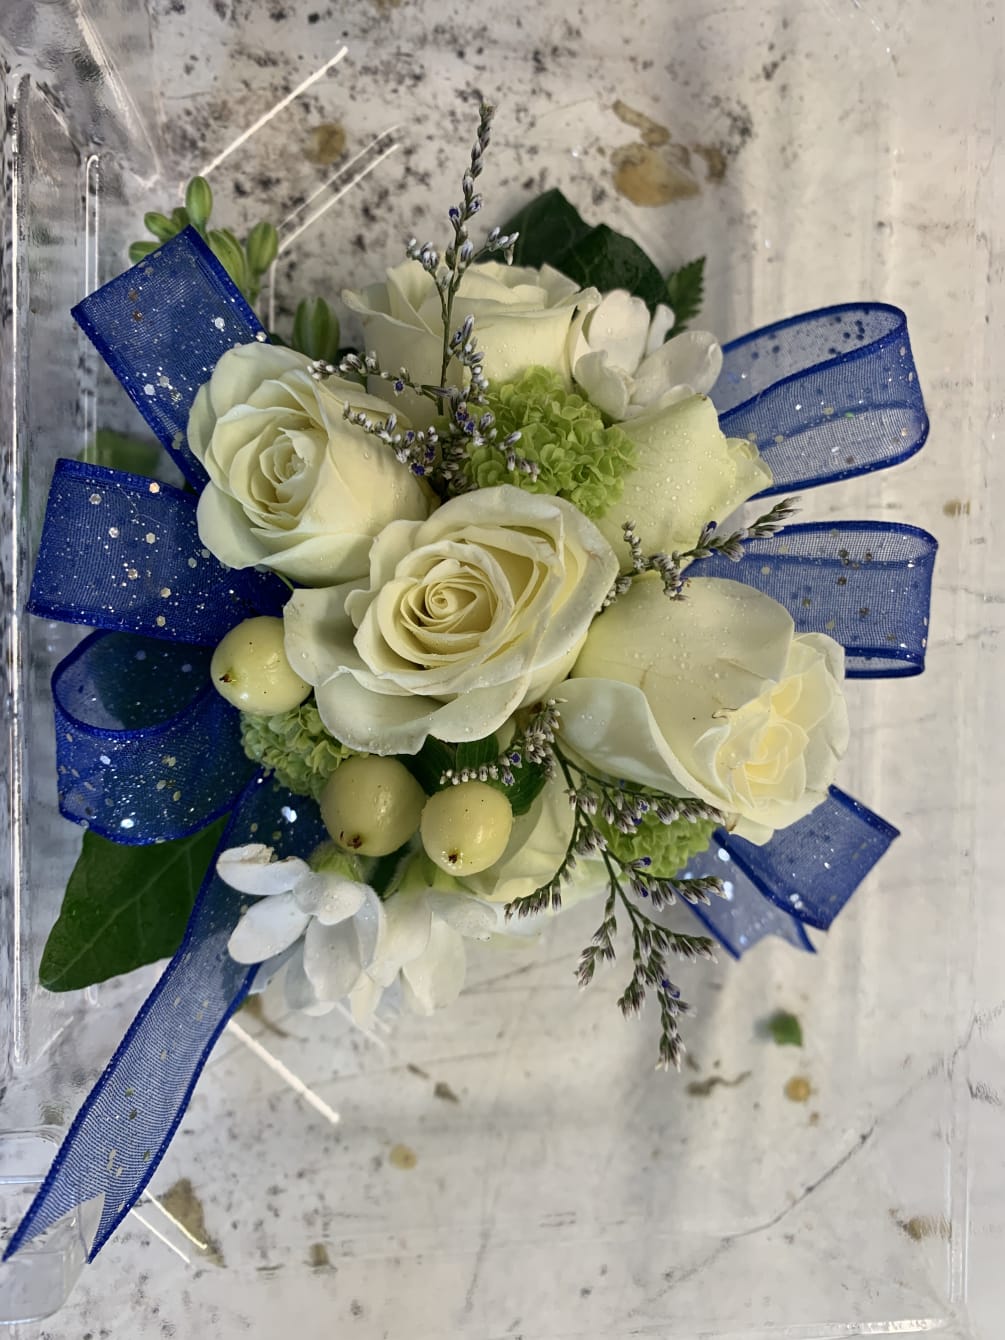 A classic corsage with colored ribbon to match the dress.  Please